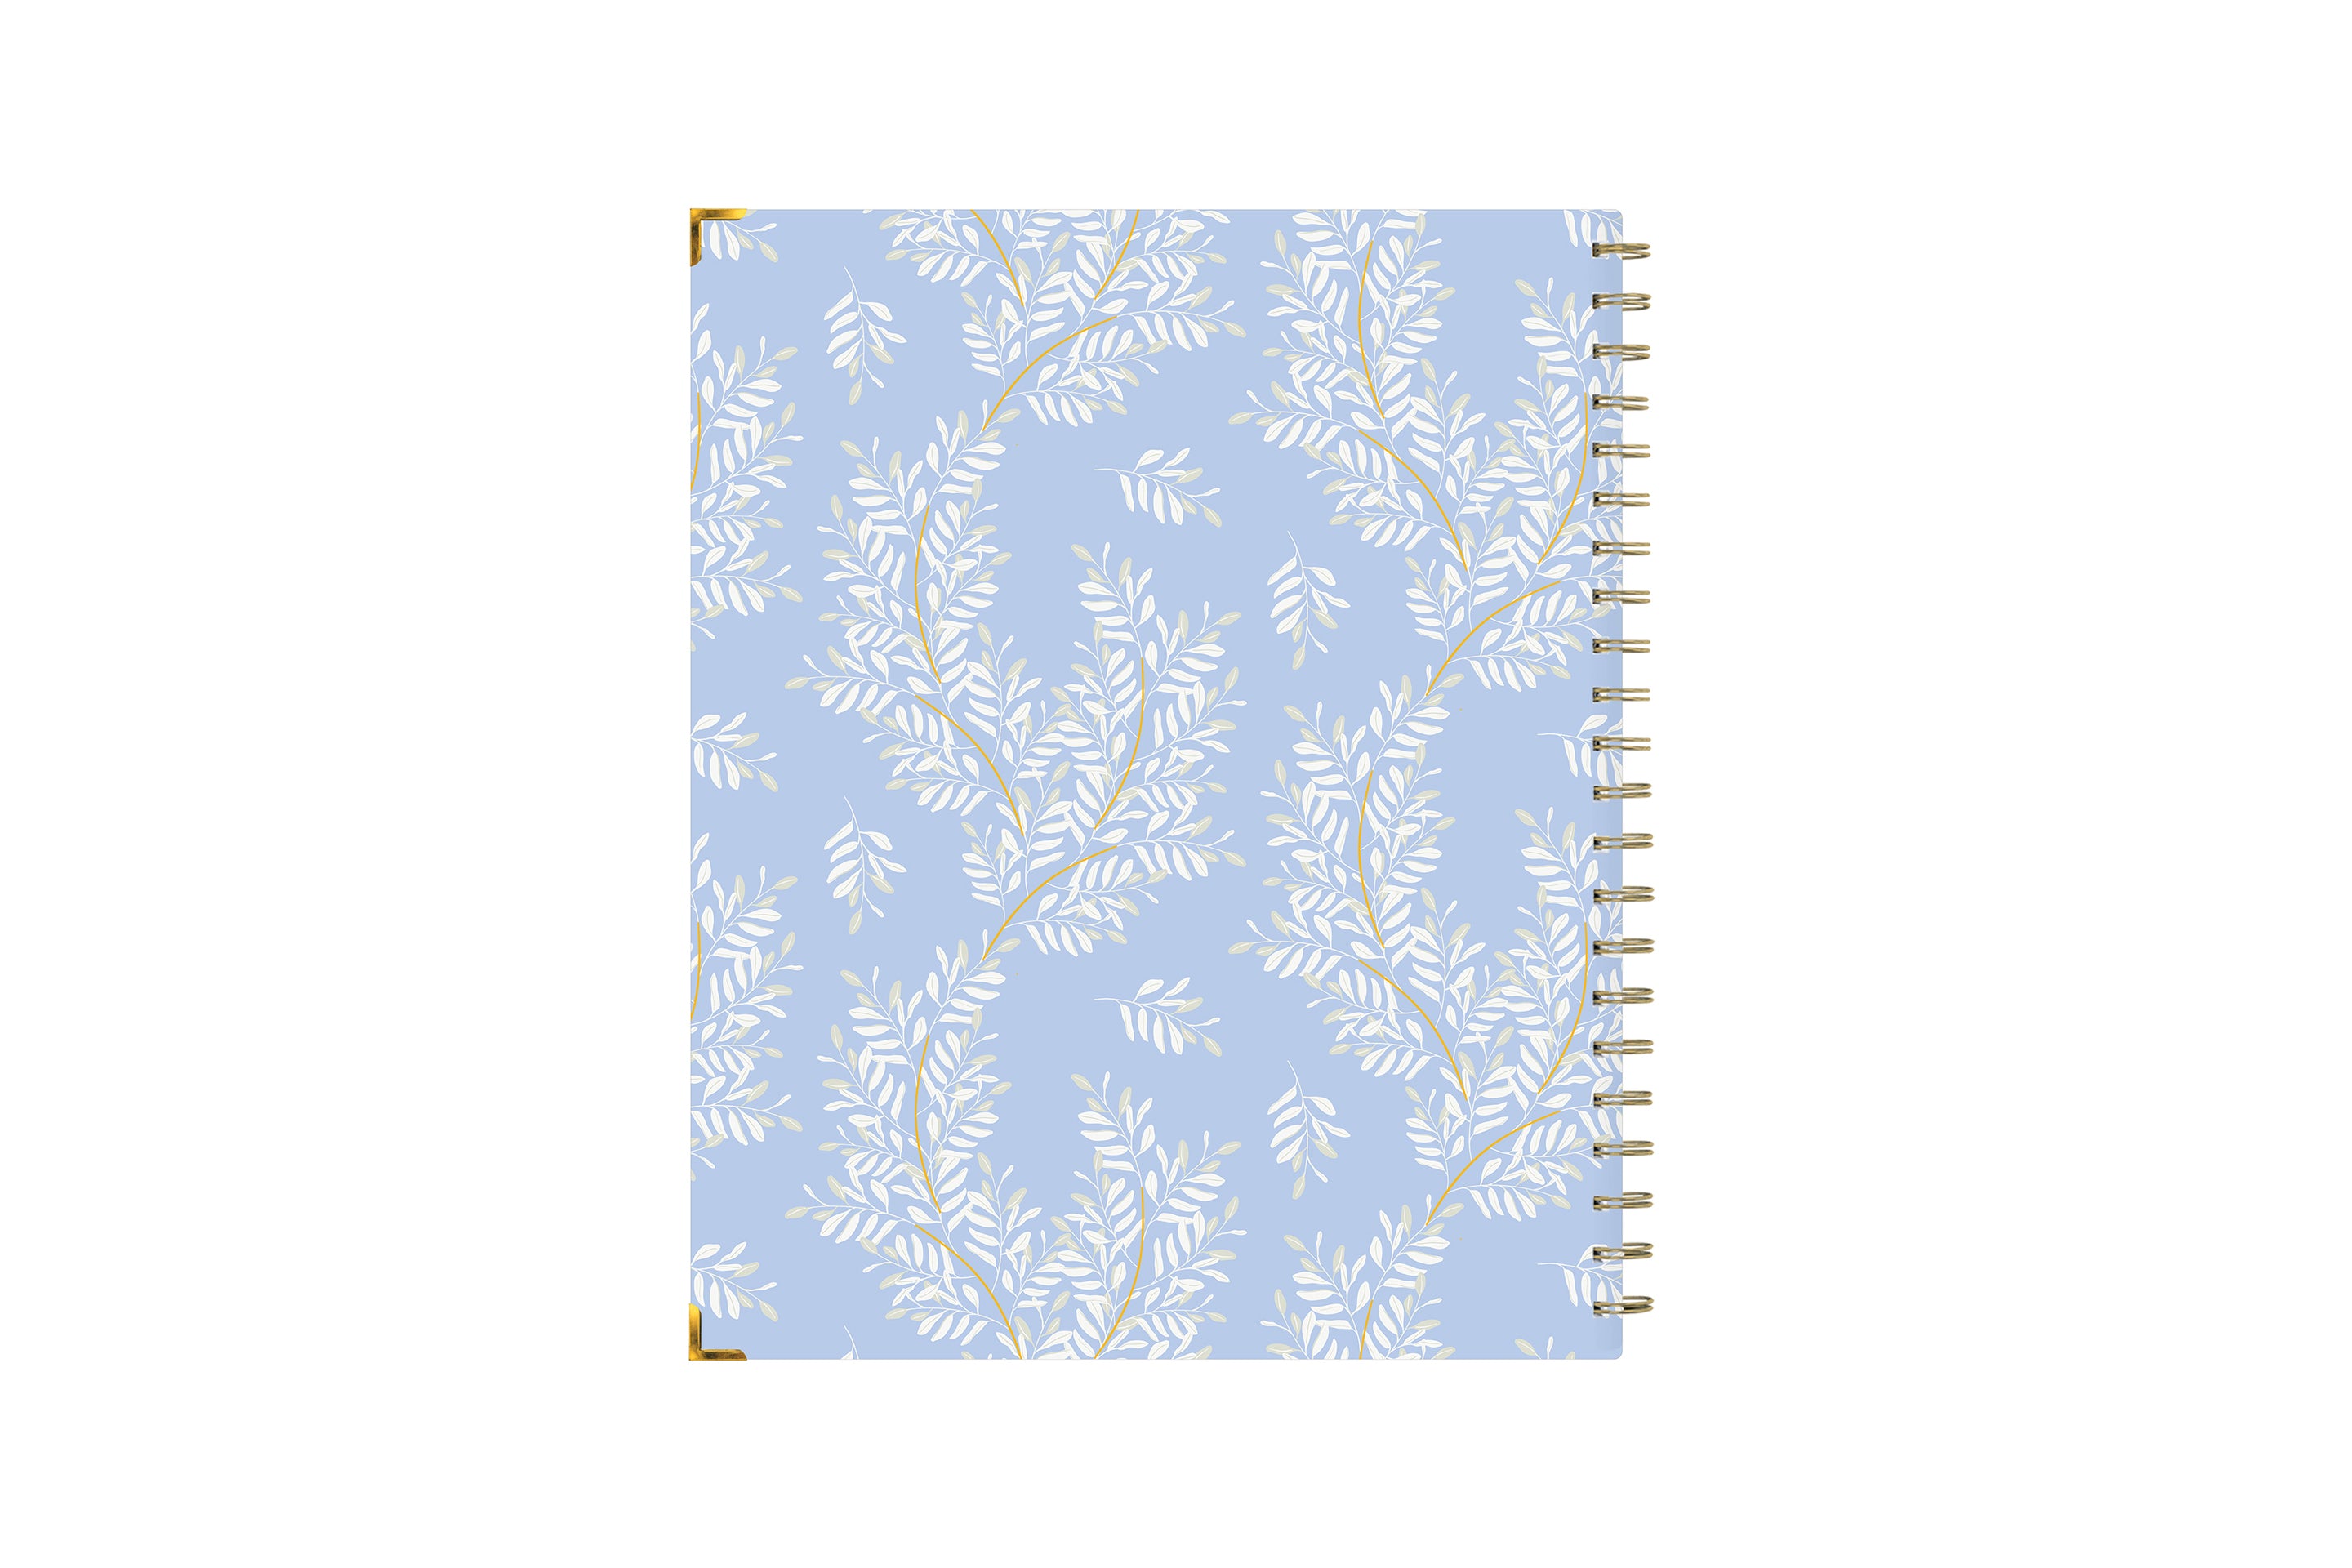 2023-2024 8.5x11 academic plammer featuring gold wire binding, gold corner tips, floral design